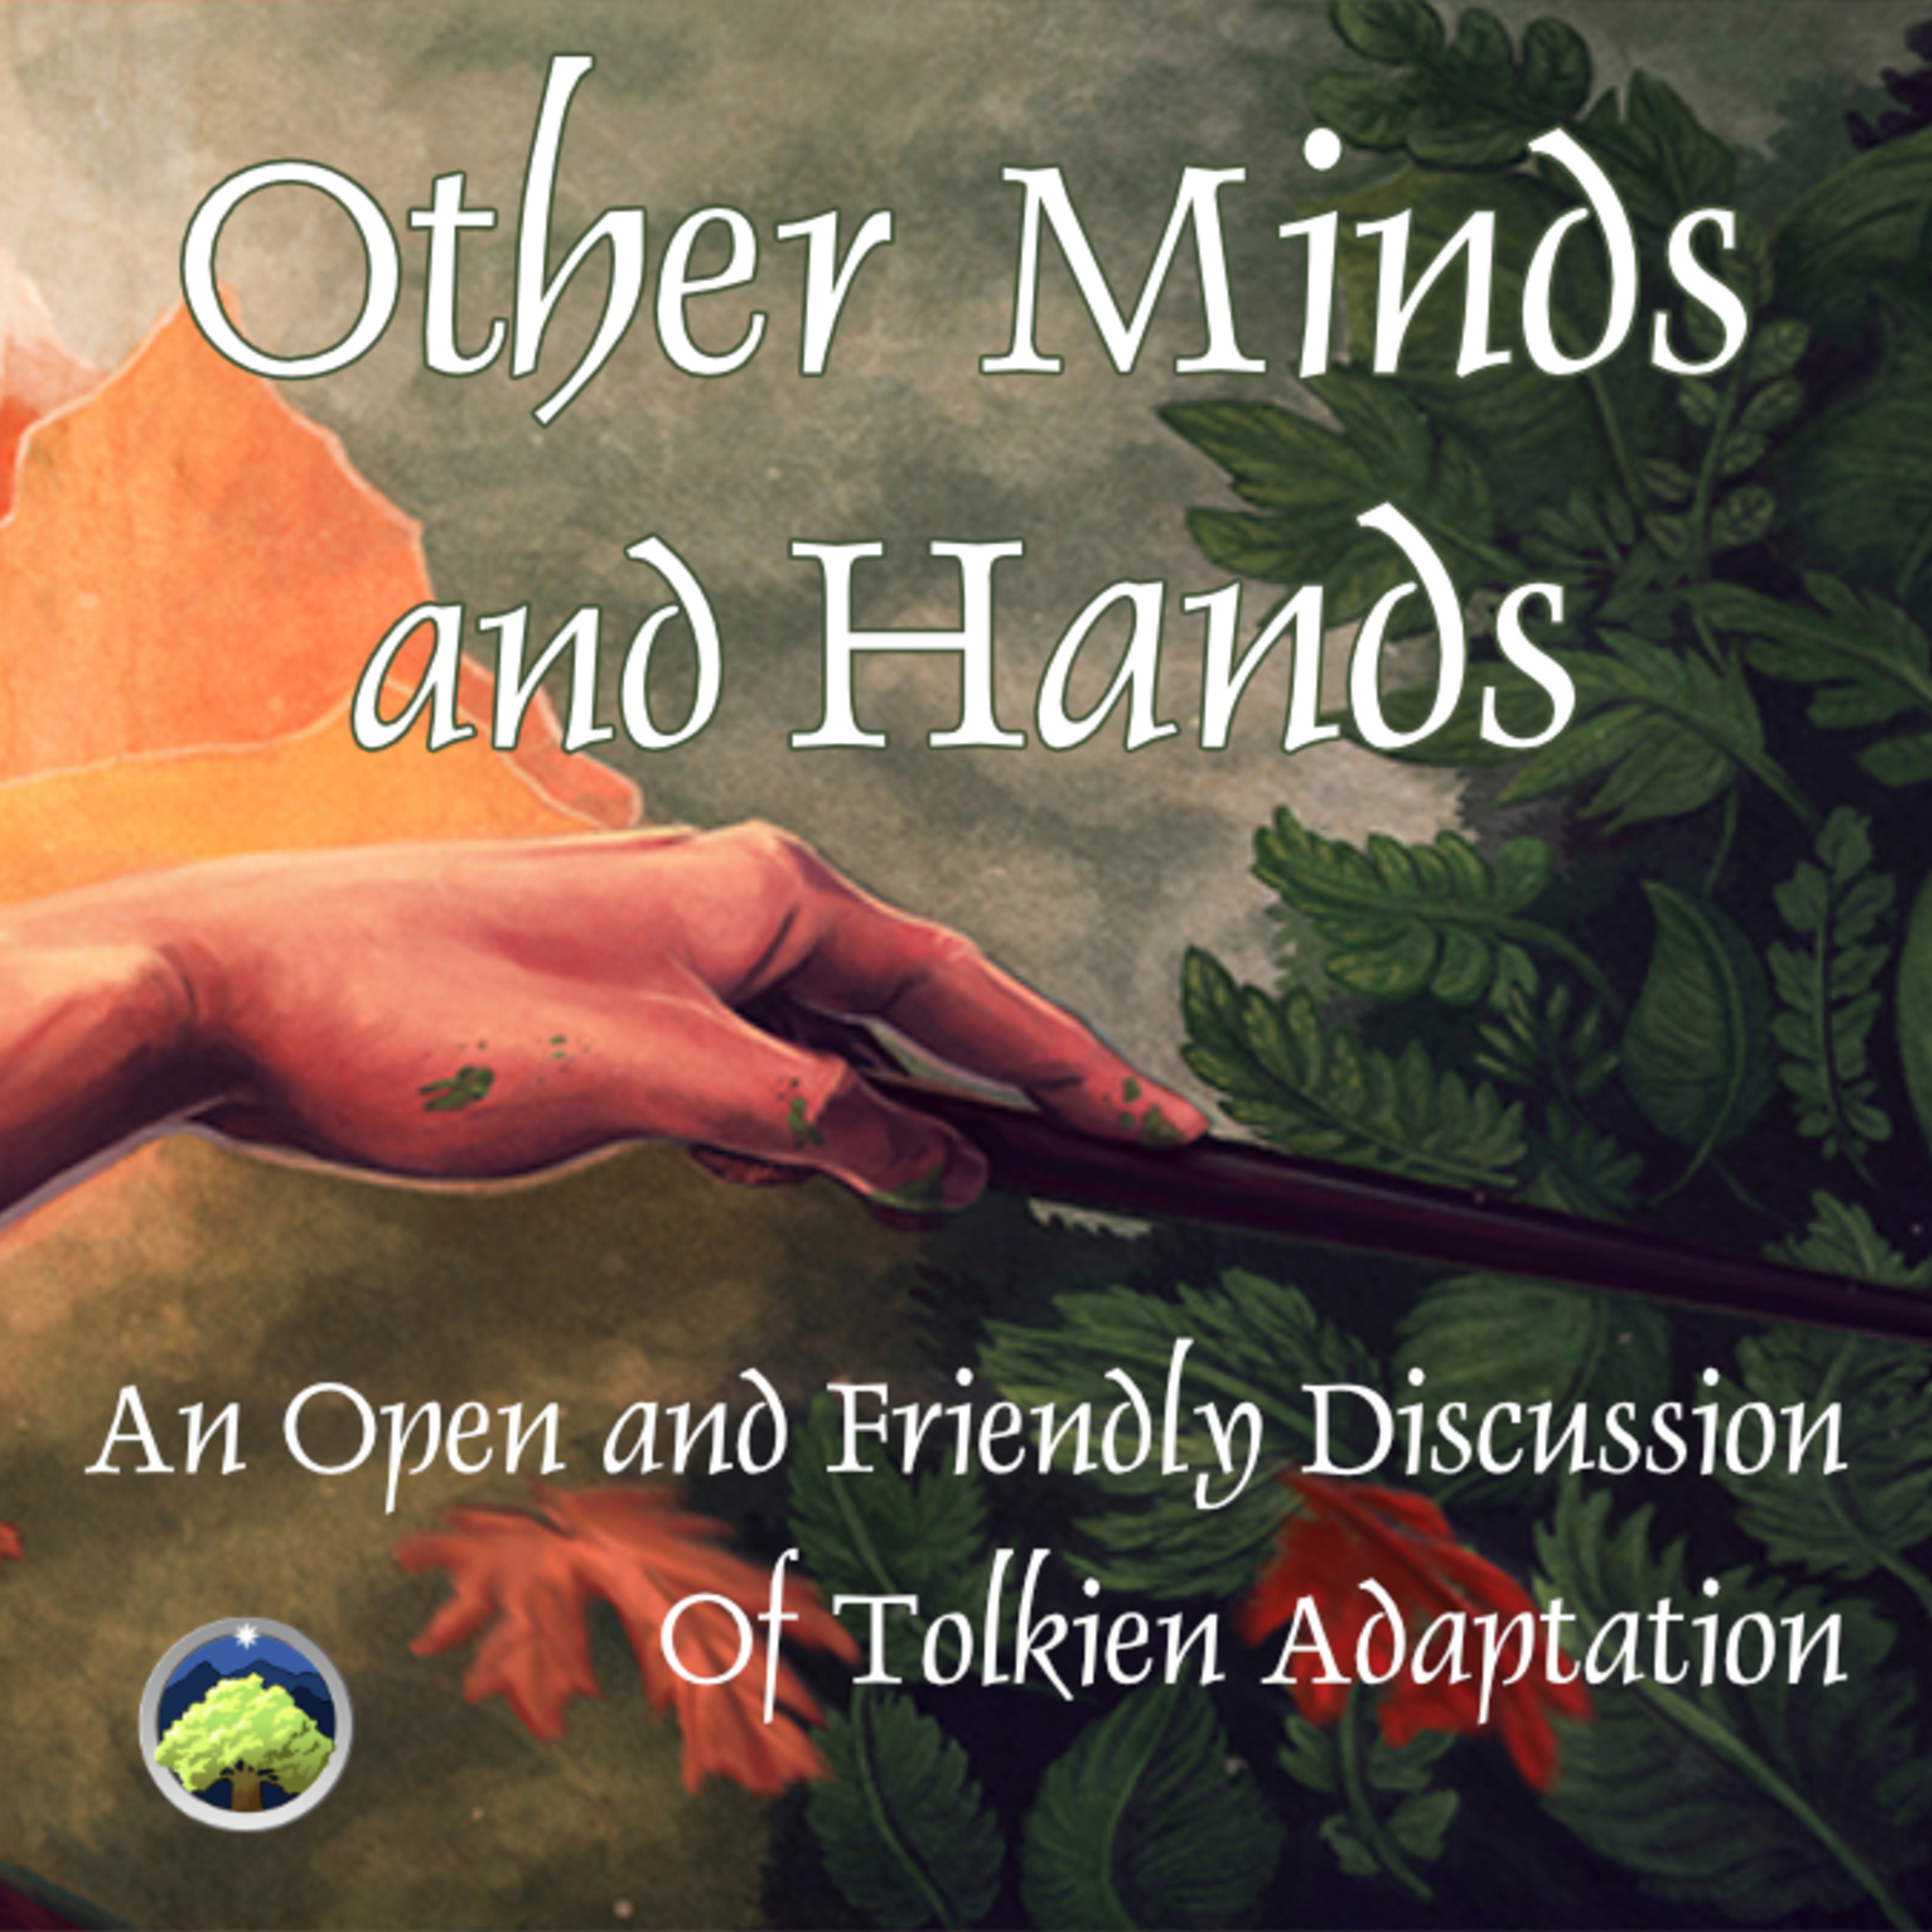 567: Other Minds and Hands, Episode 68